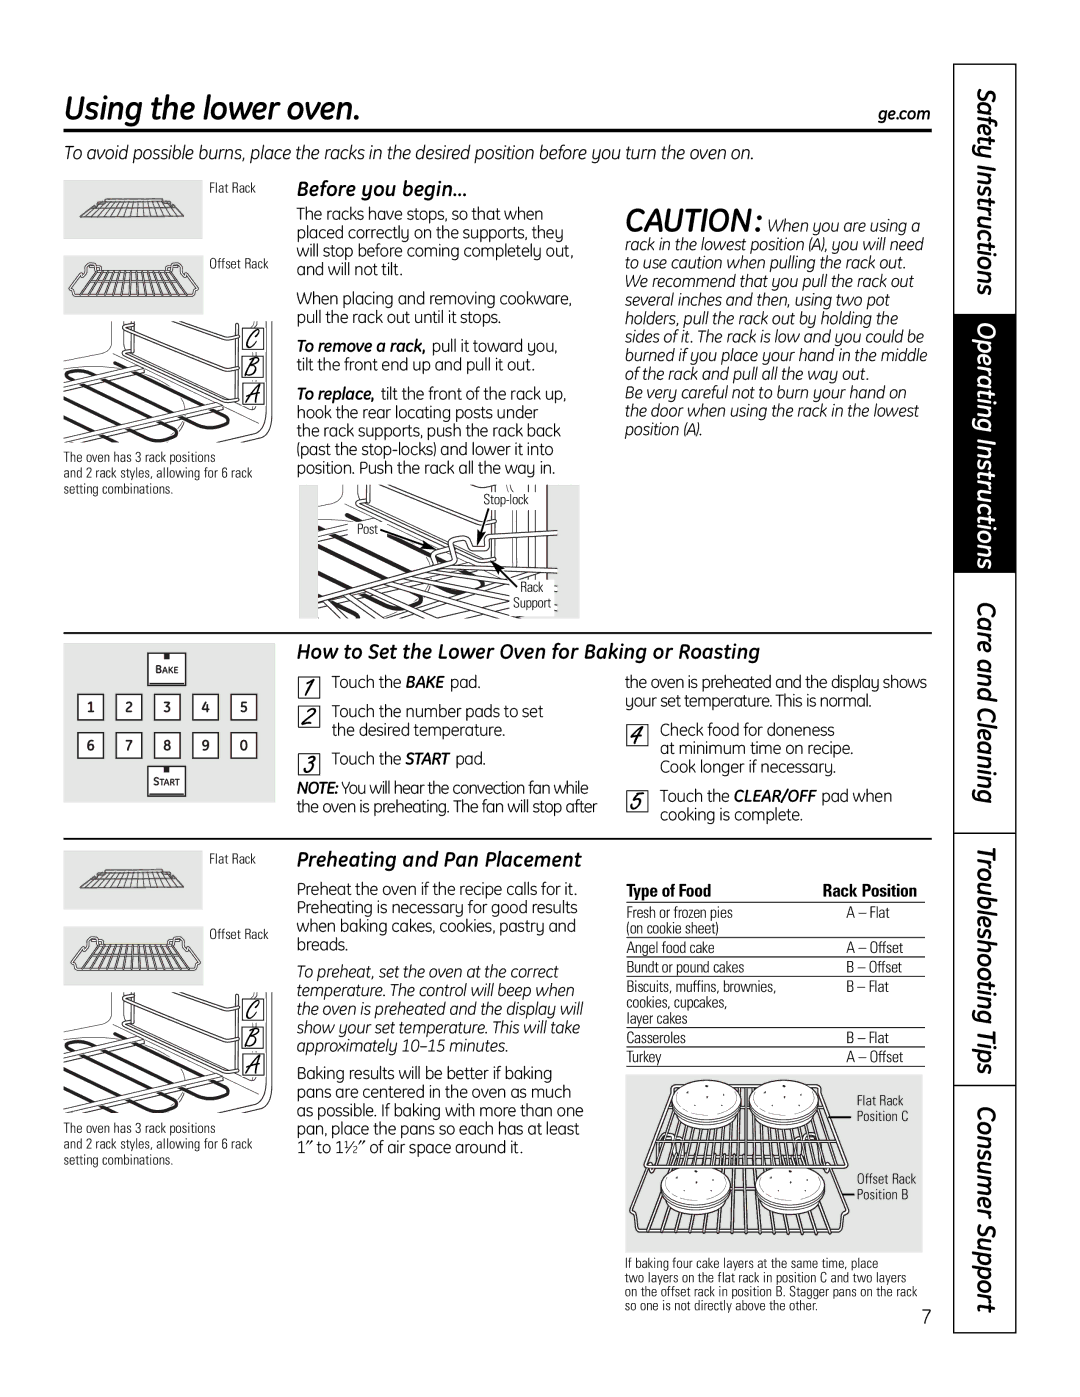 GE PT925 manual Using the lower oven, Safety, How to Set the Lower Oven for Baking or Roasting 